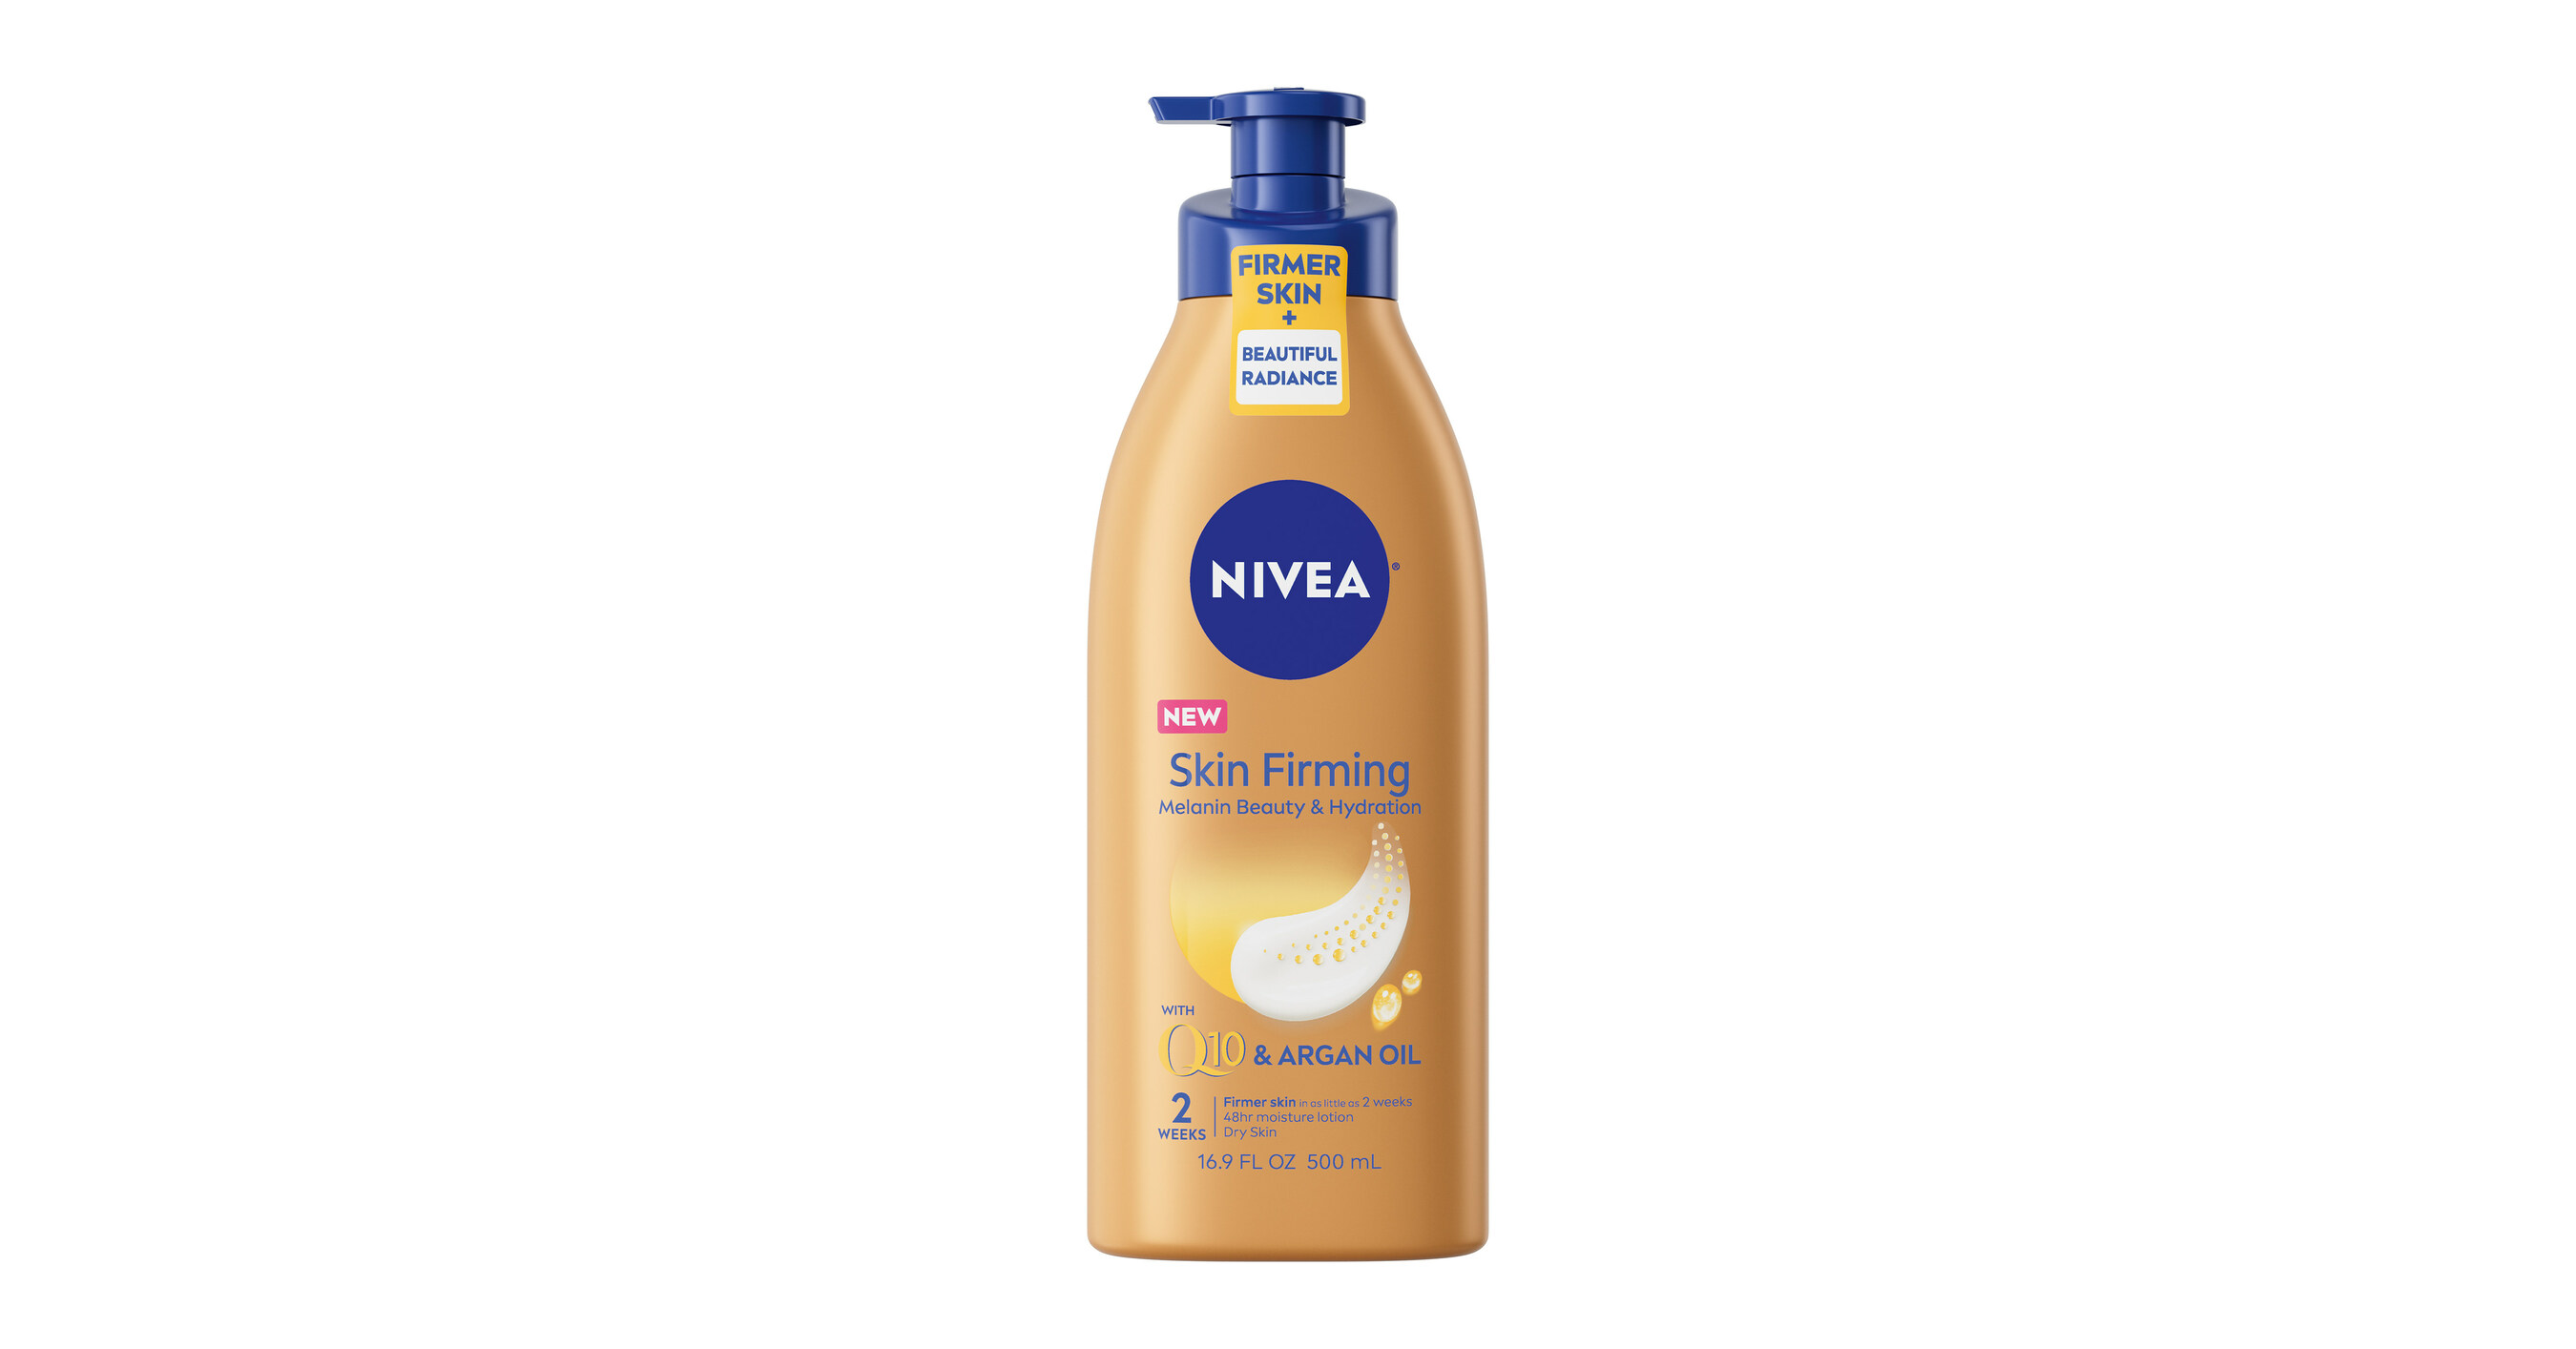 Fall for a New Skincare Routine! NIVEA Encourages Women to Firm and Hydrate  Their Melanin-Rich Skin as The Season Changes